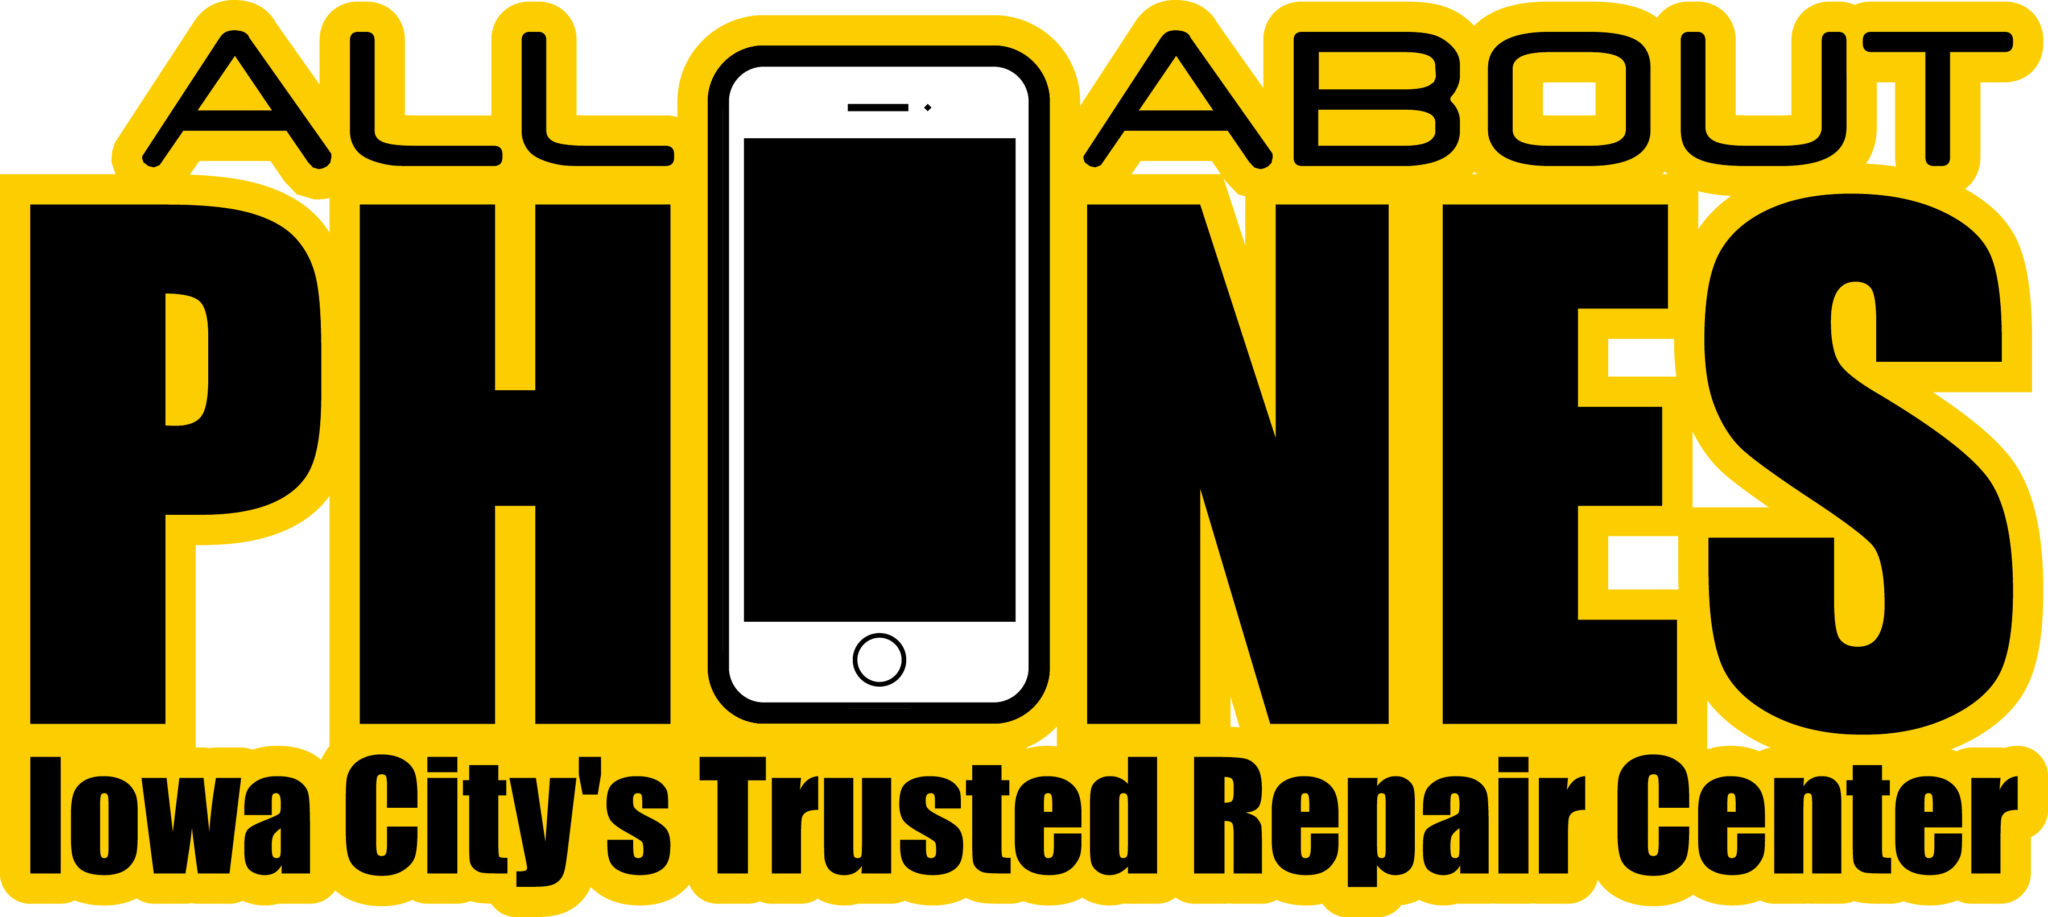 Company logo of All About Phones: iPhone Smartphone Tablet Repair